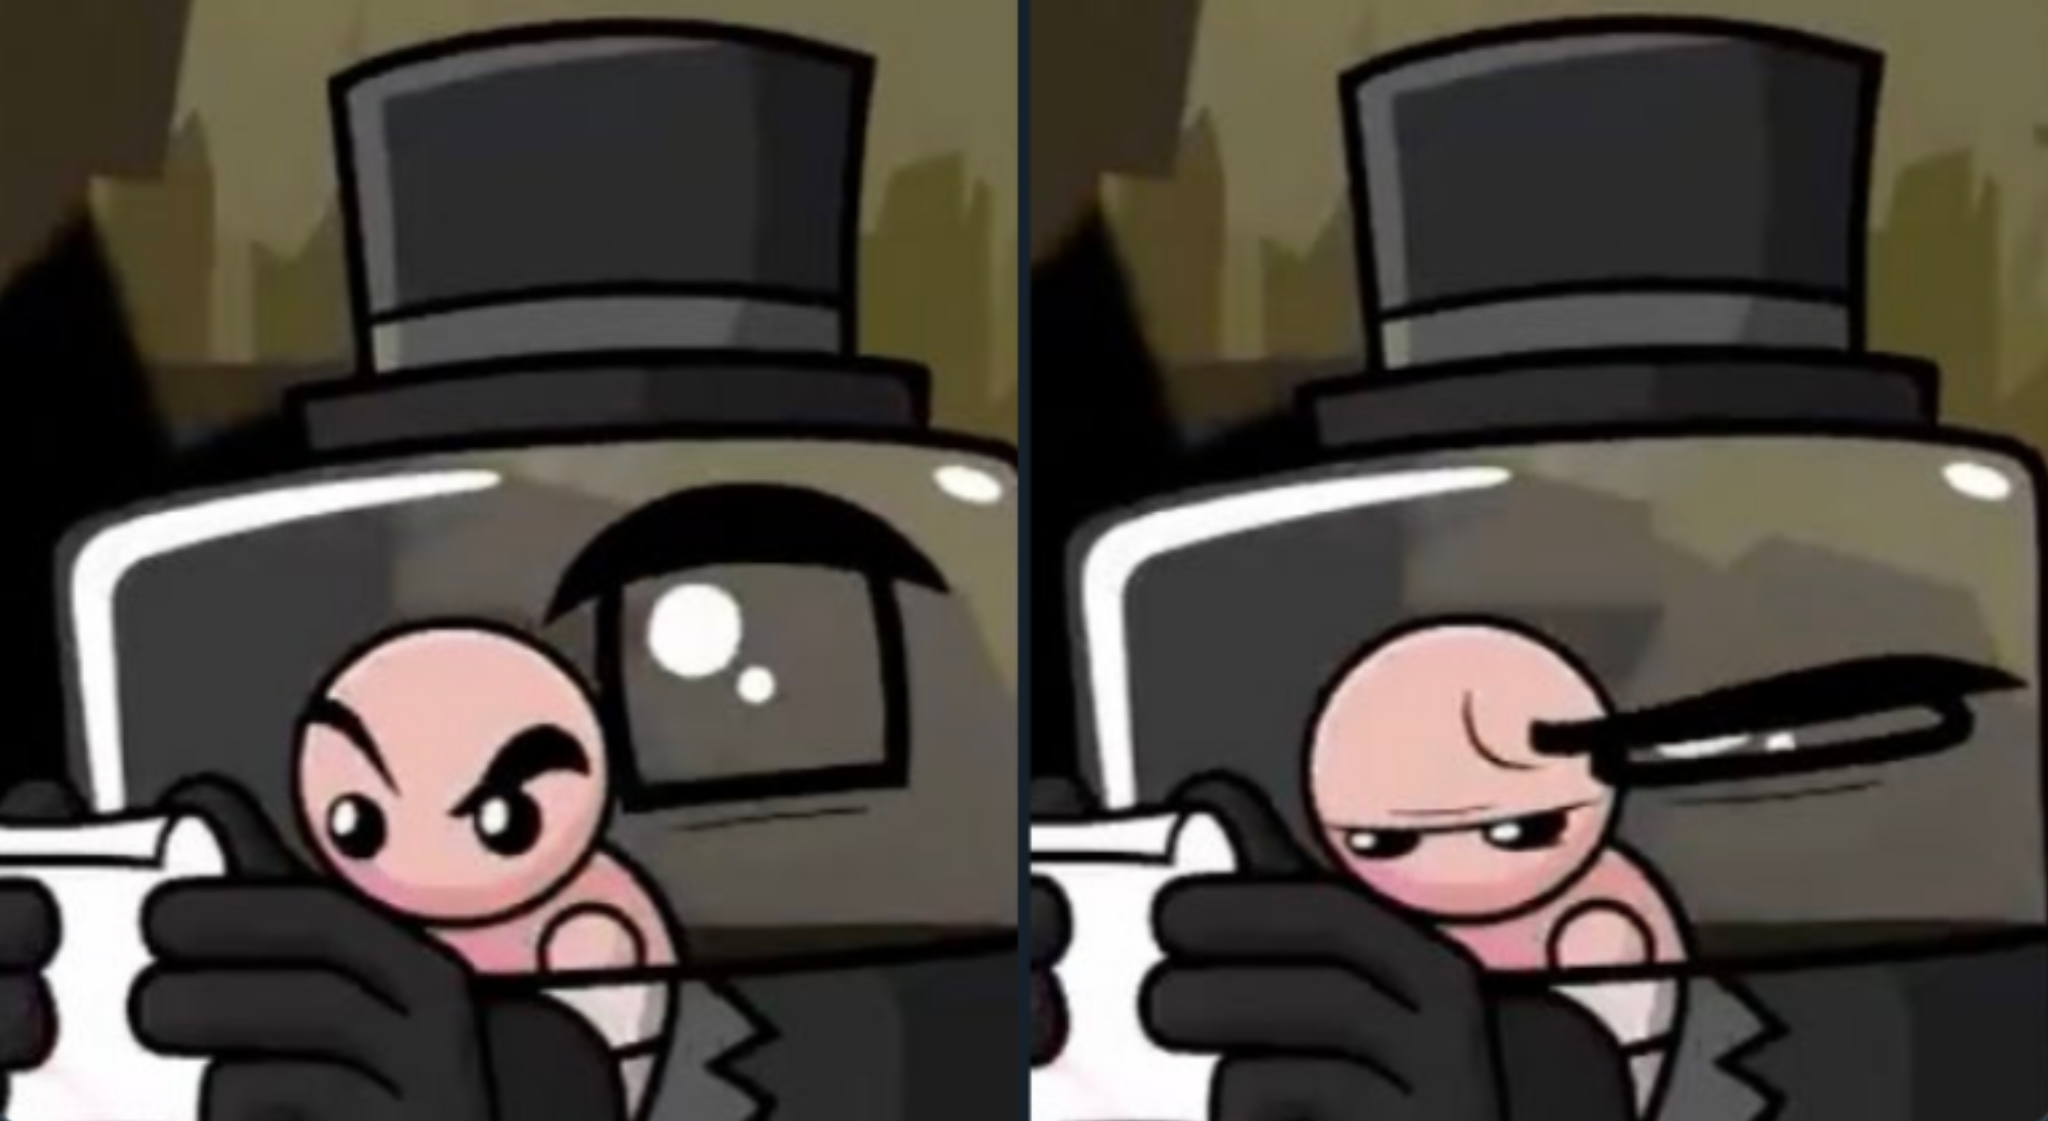 Dr Fetus' Visible Disappointment Blank Meme Template